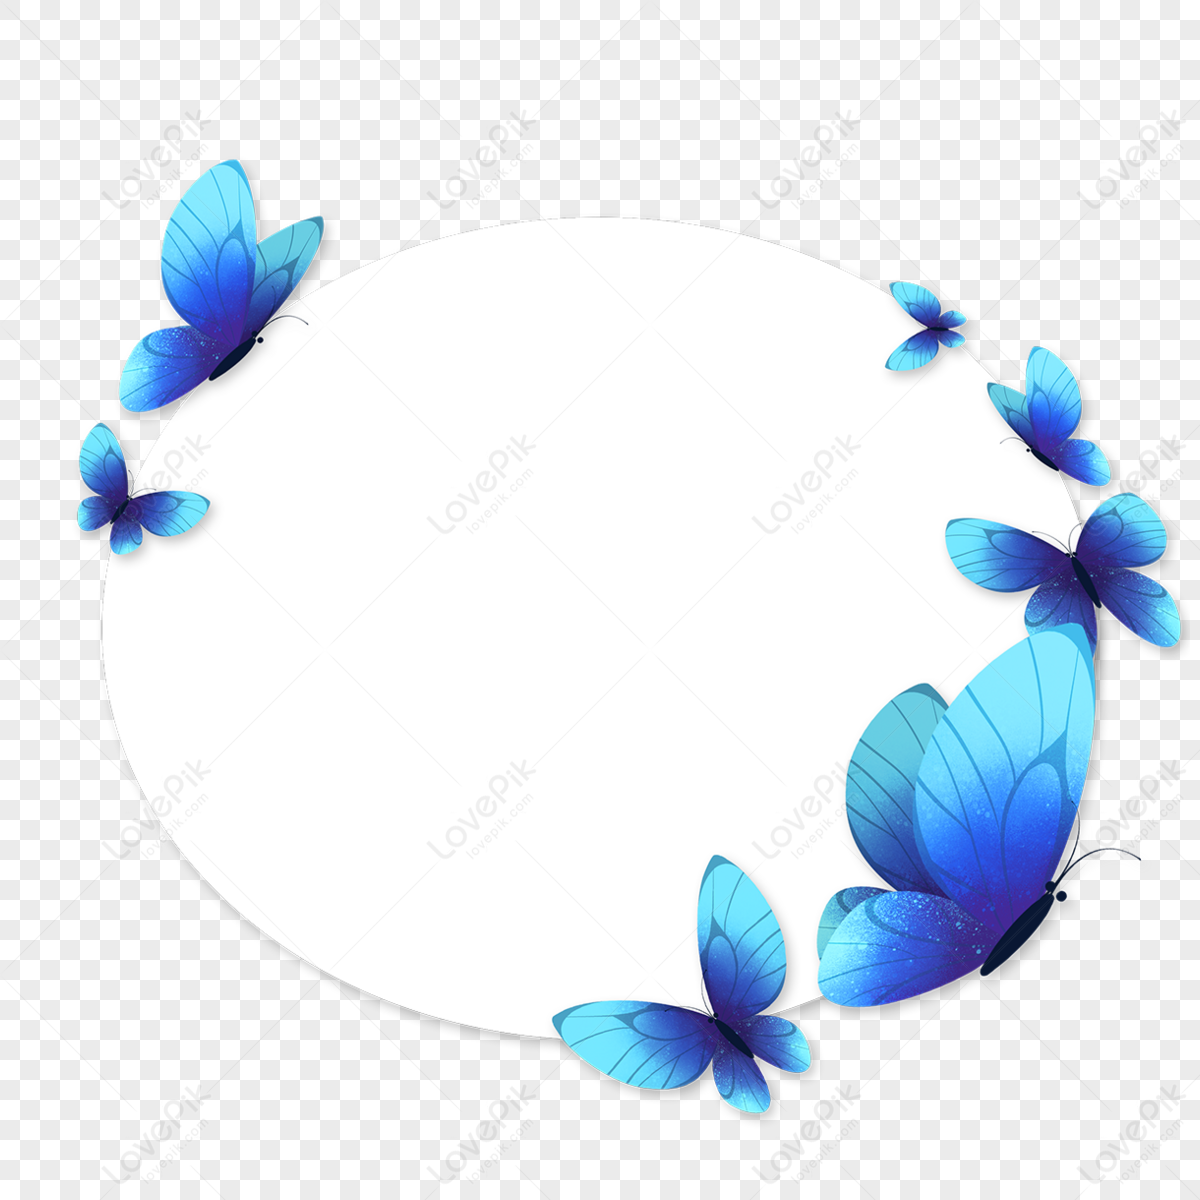 Blue butterfly images hd pictures for free vectors download